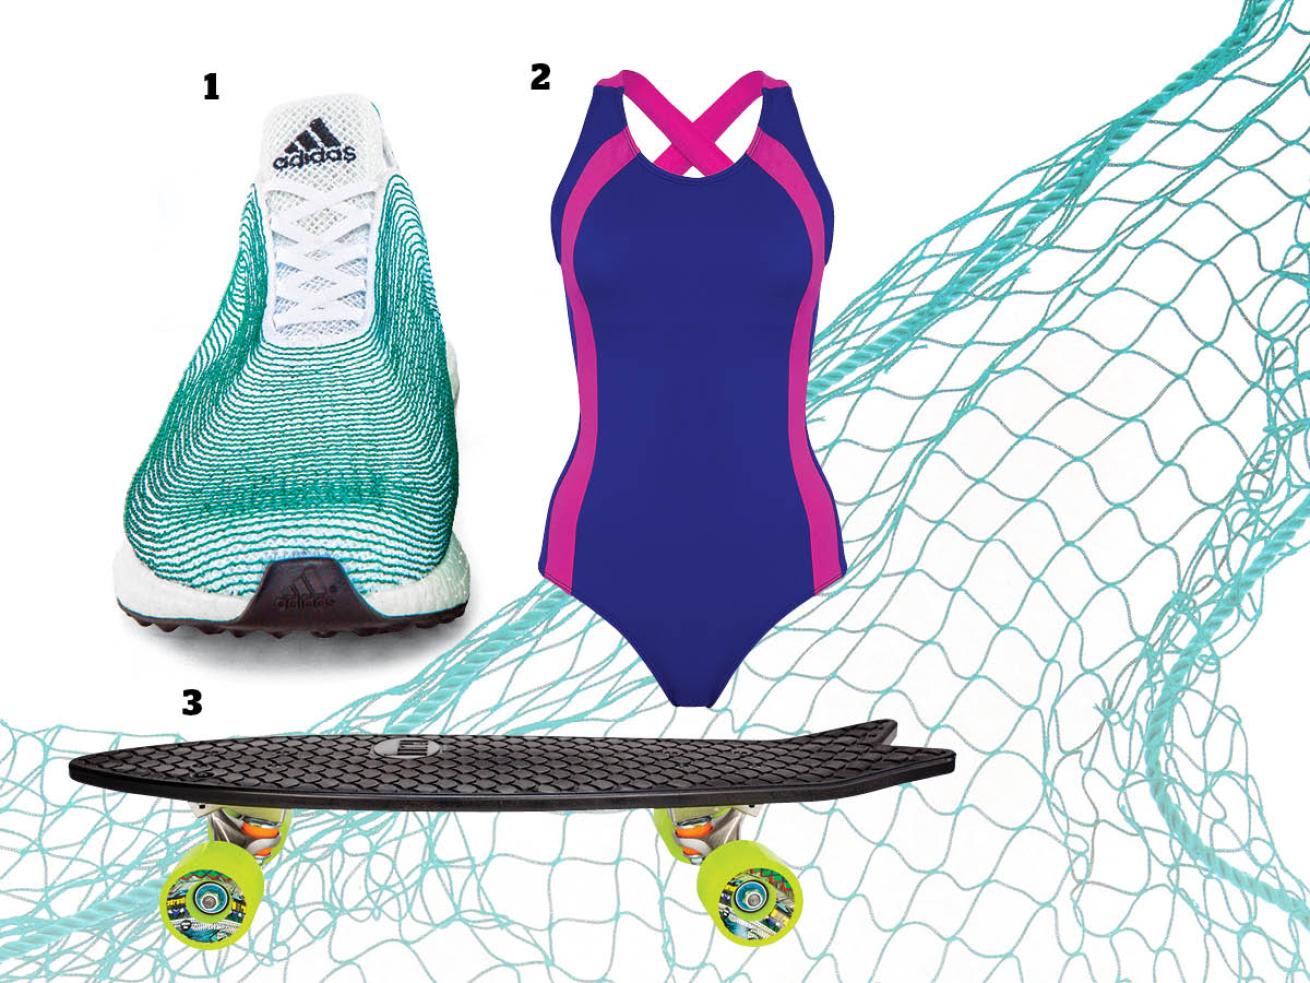 Shoes, skateboards and swimwear made from fishing net marine debris